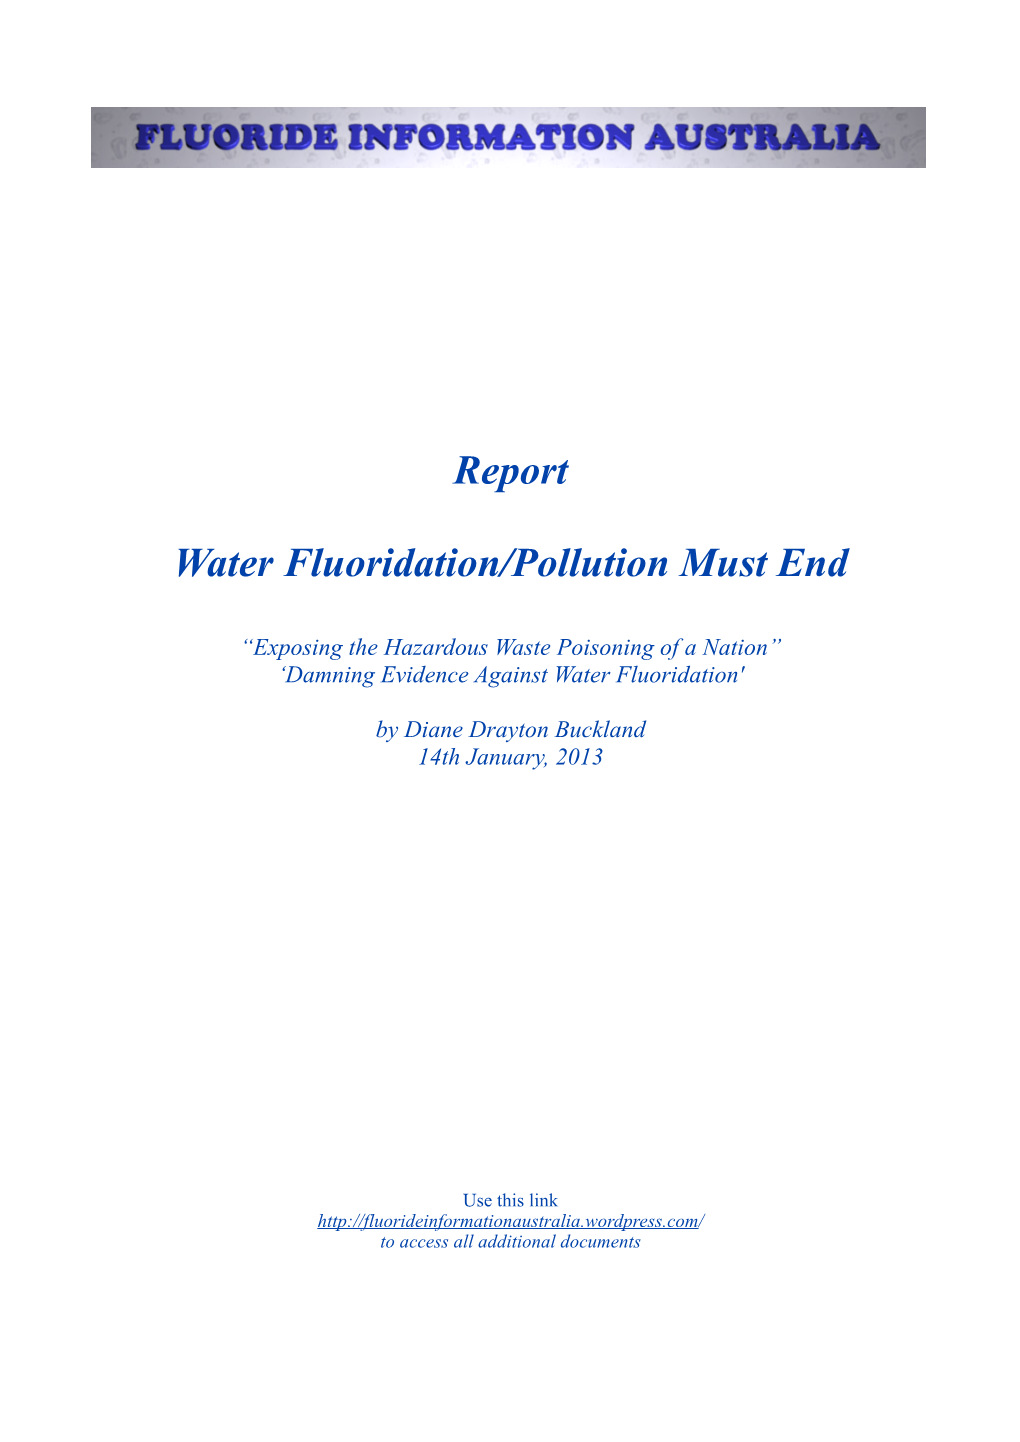 Report- Water Fluoridation-Pollution Must